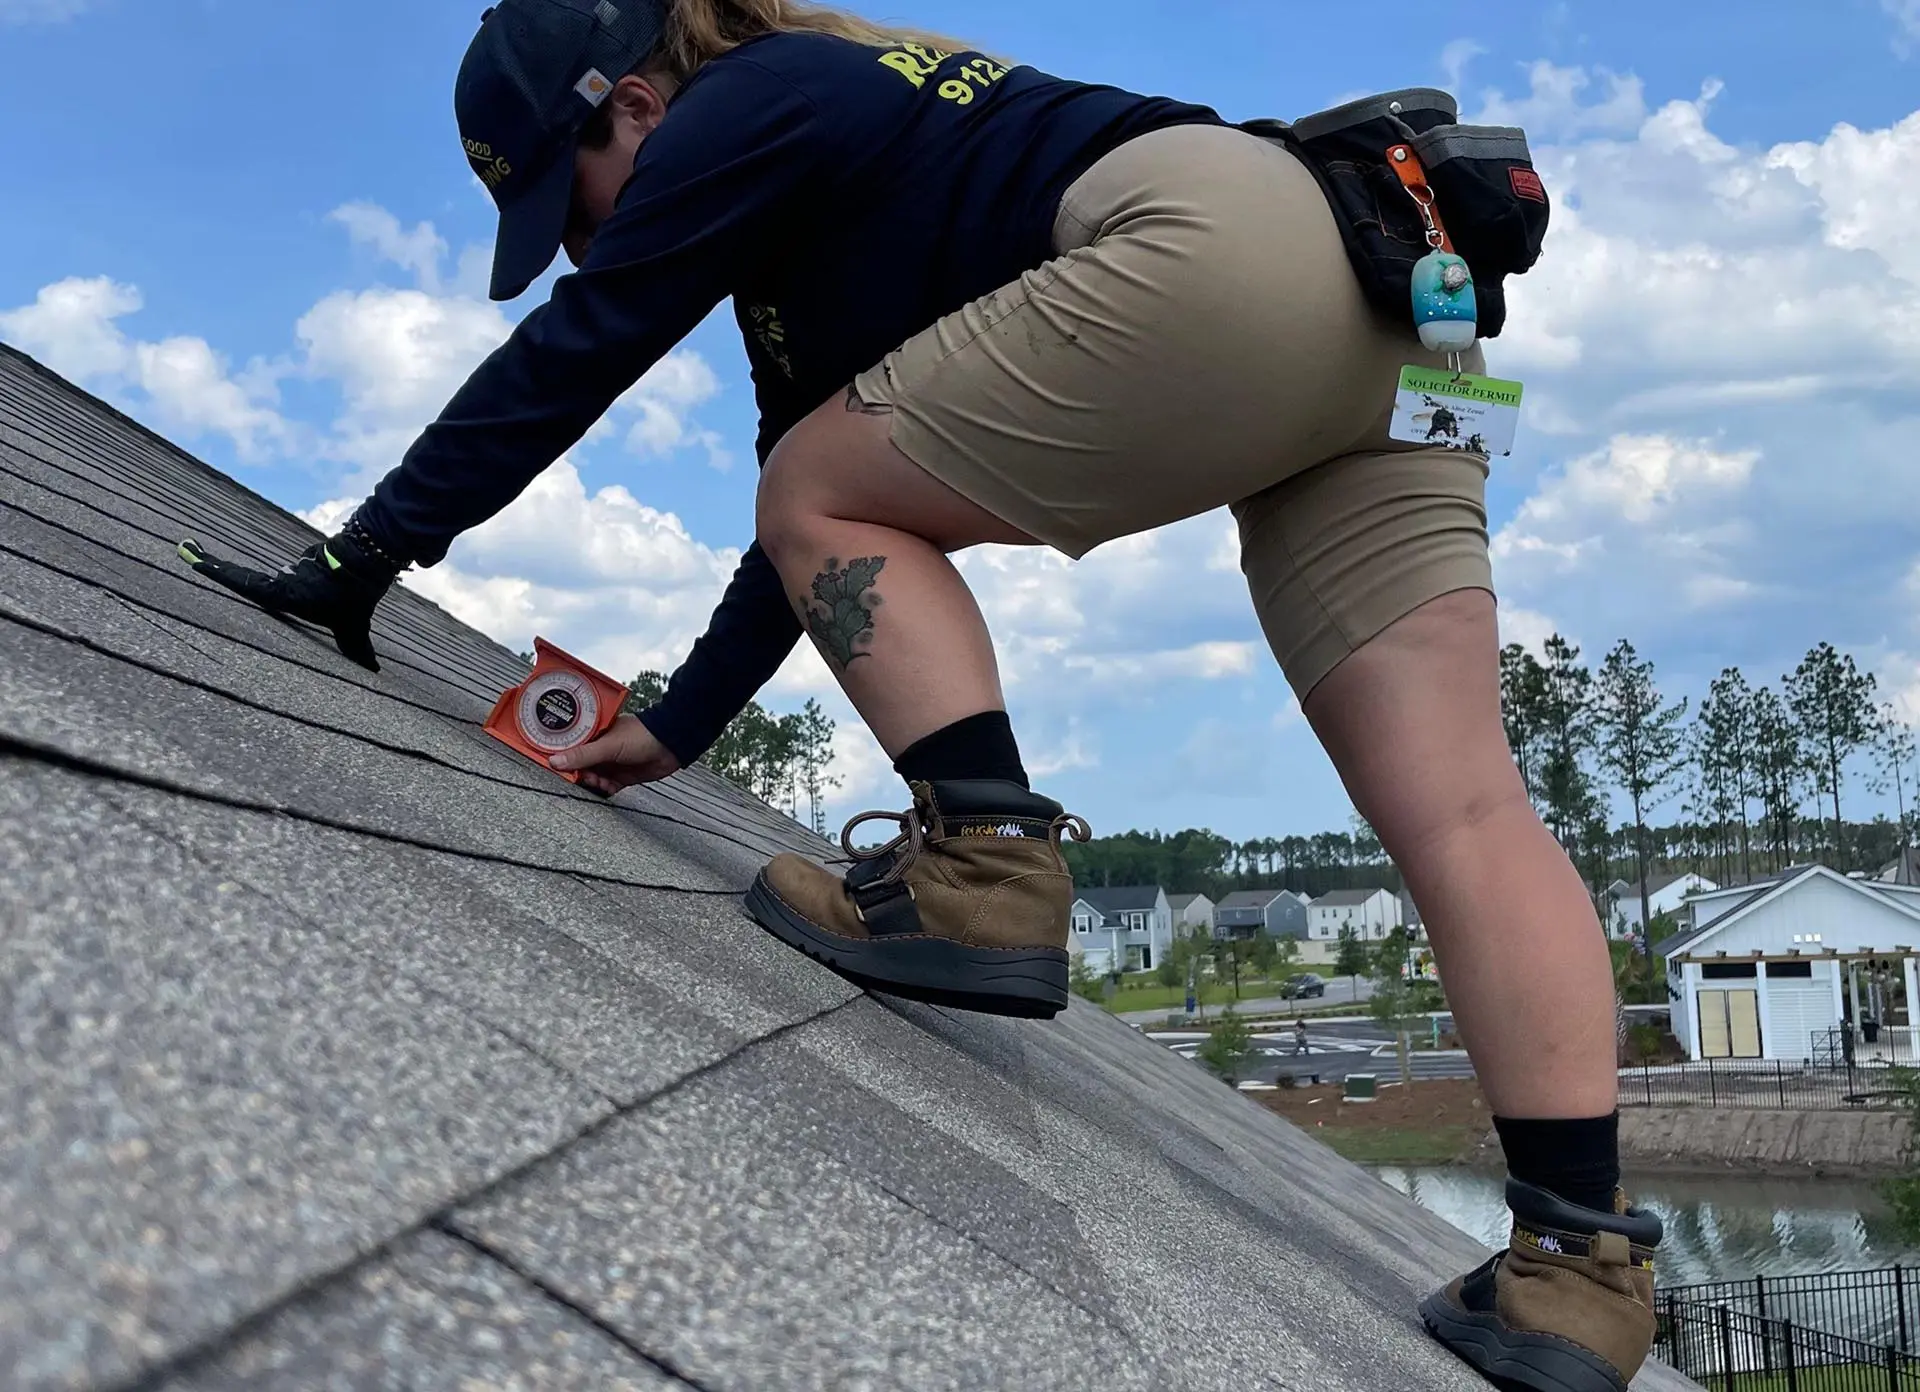 A woman working on the roof with equipment